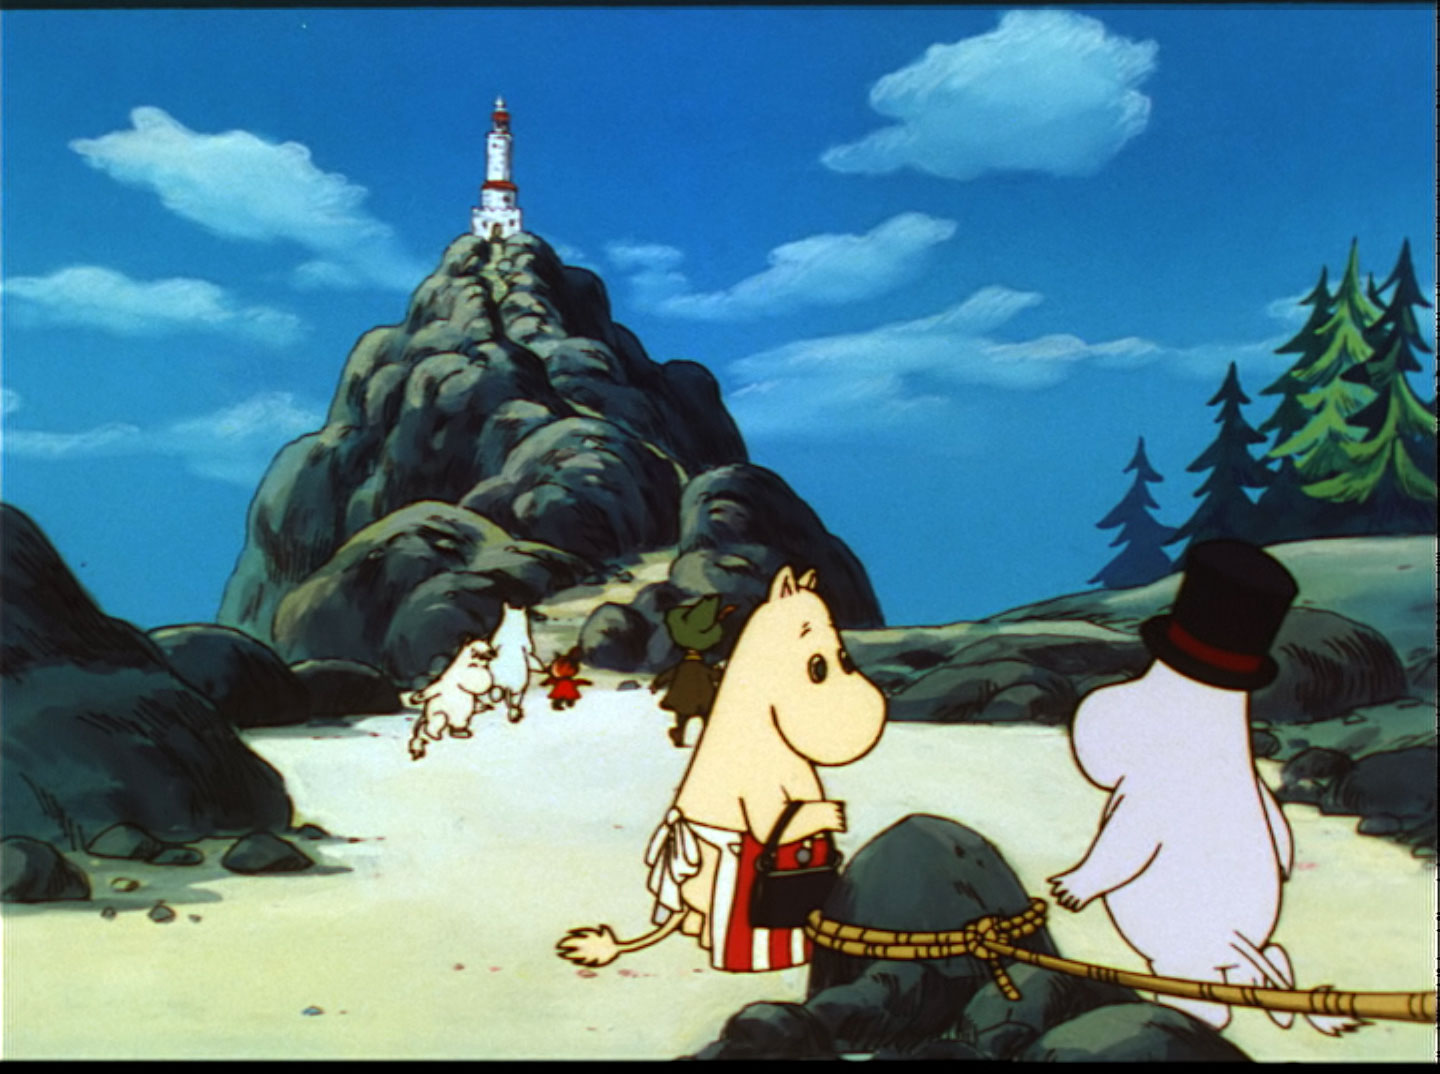 The history of the Moomin animations